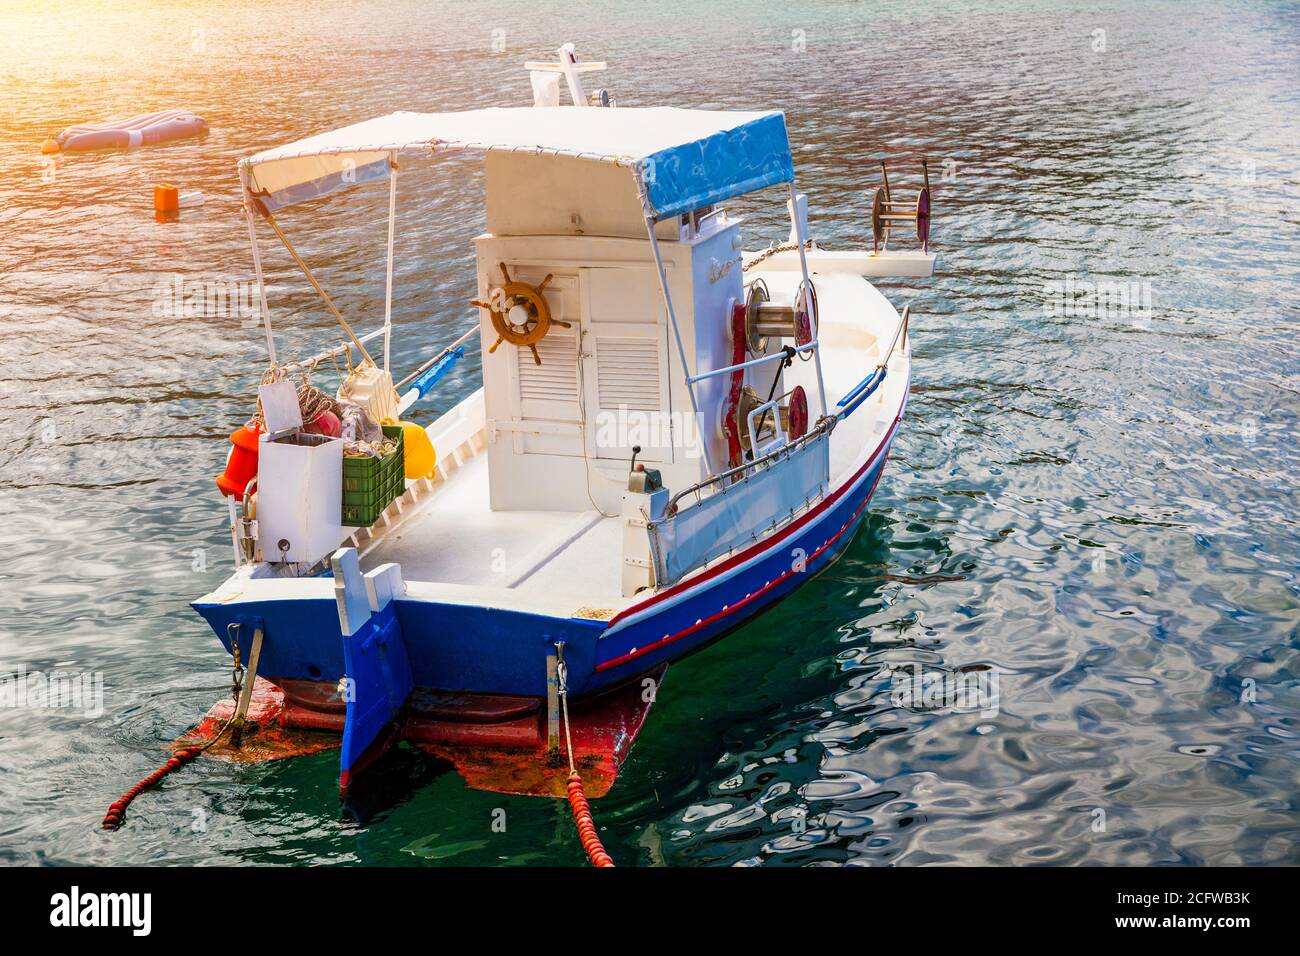 Vintage wooden boat in coral sea. Boat drone photo. Fishing boats in clear  turquoise ocean, top view. Small fishing boat moored in blue clean transpar  Stock Photo - Alamy